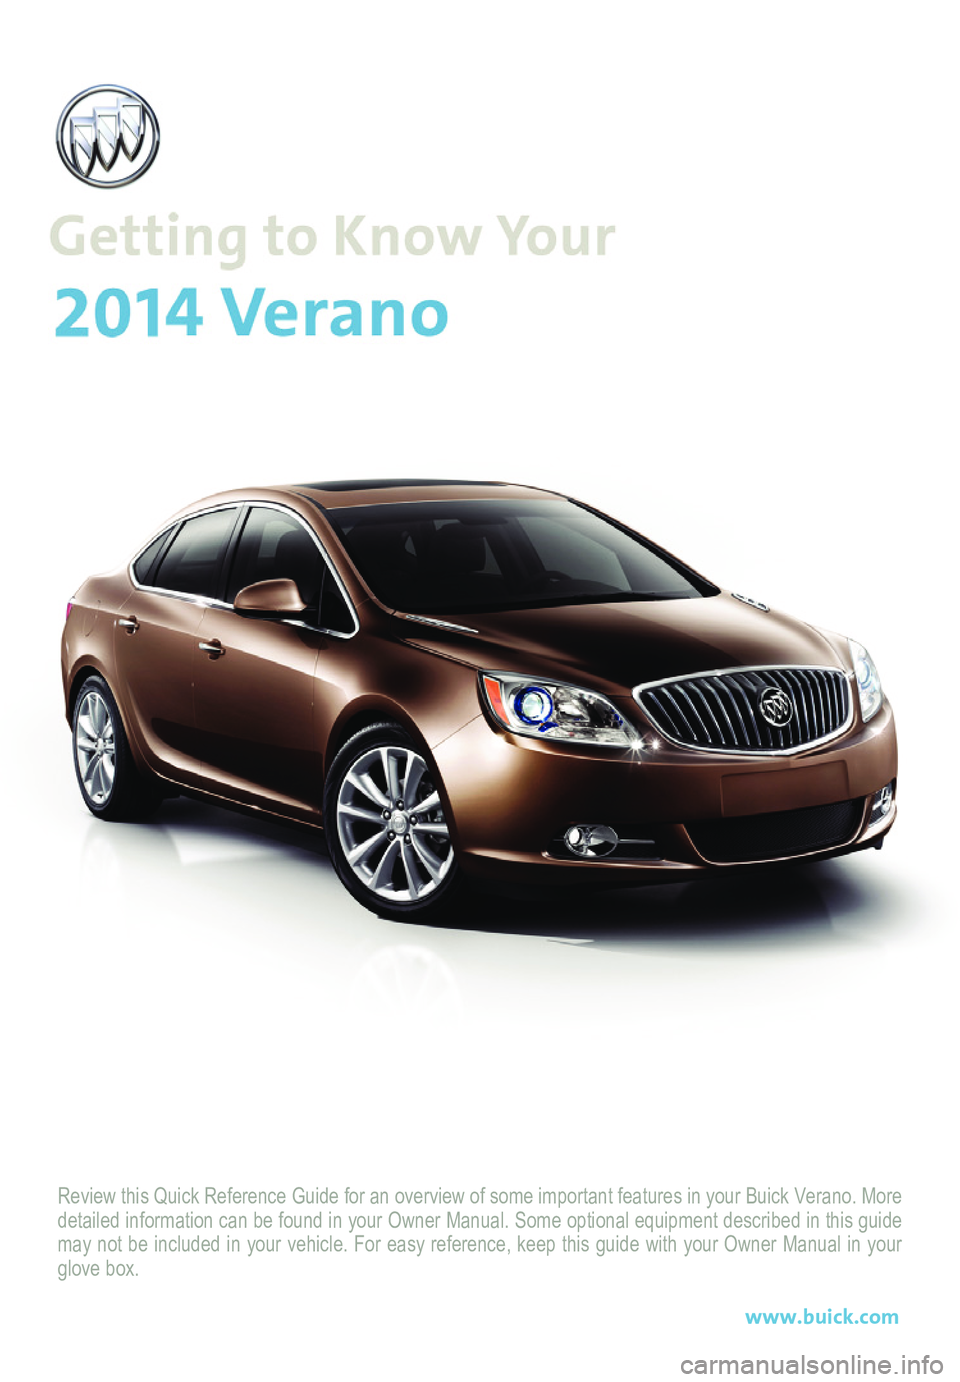 BUICK VERANO 2014  Get To Know Guide Review this Quick Reference Guide for an overview of some important feat\
ures in your Buick Verano. More detailed information can be found in your Owner Manual. Some optional eq\
uipment described in